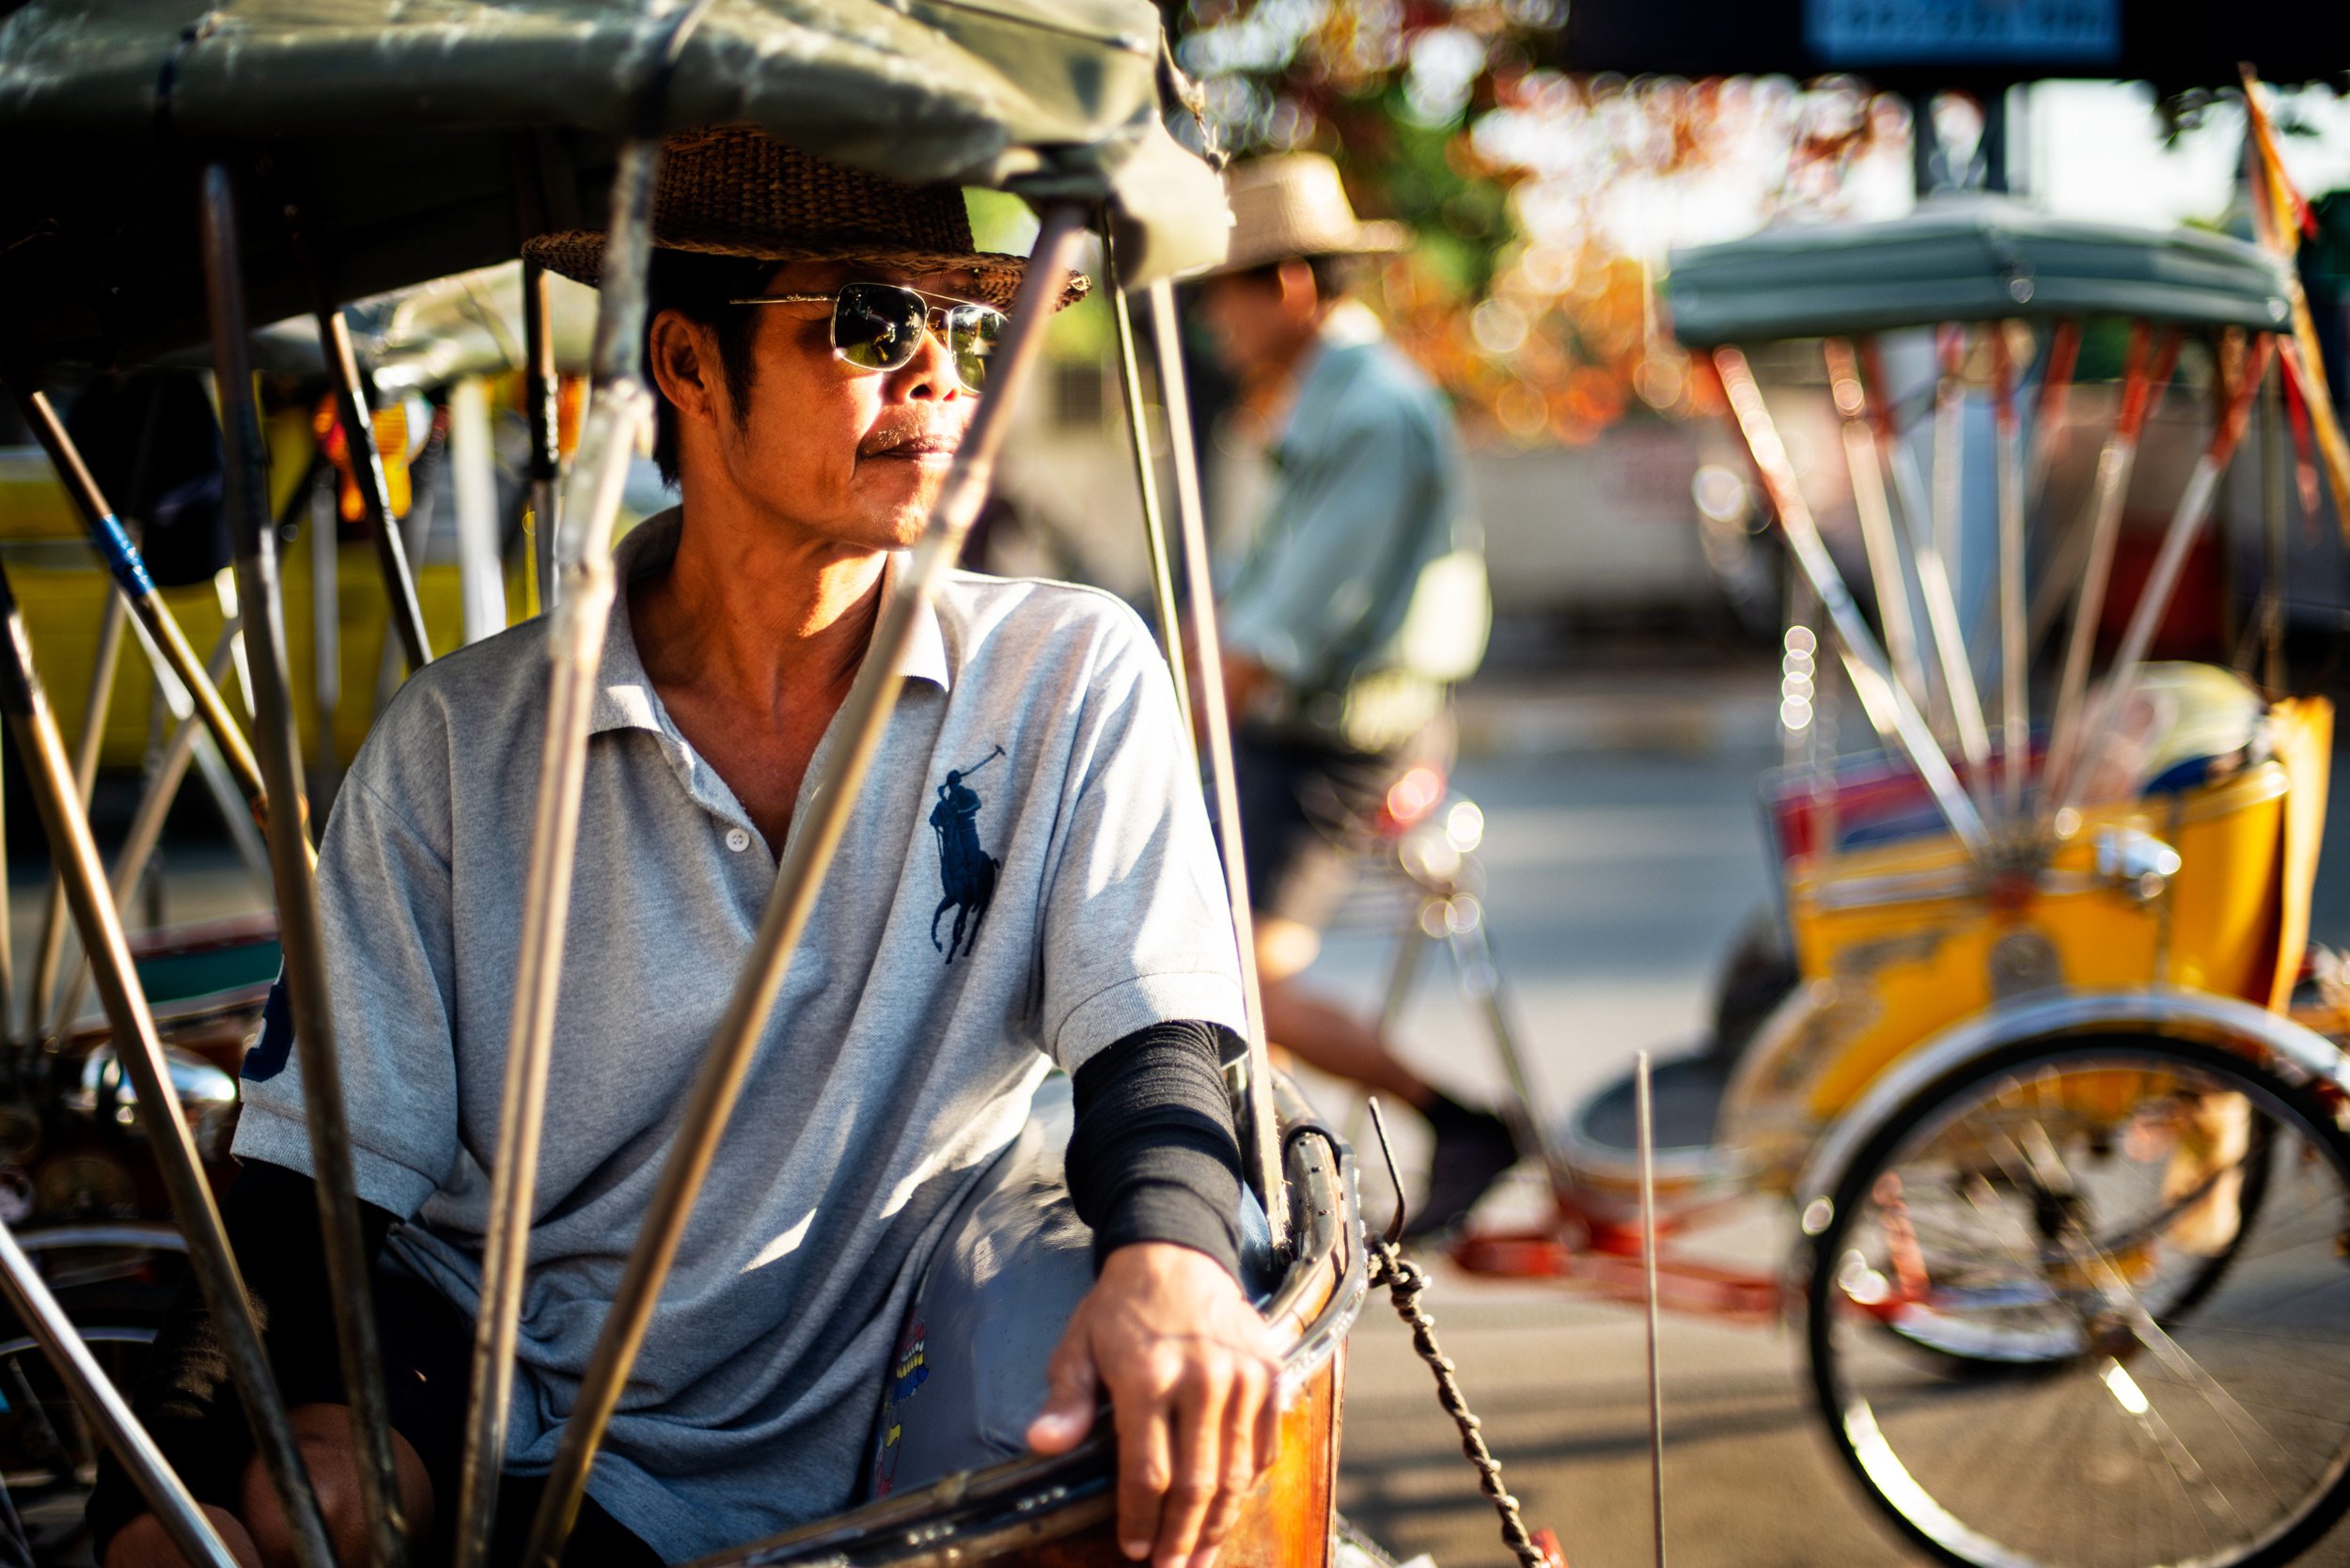 Cycle taxi rider taking a break in Chiang Mai at Warorot Market © Kevin Landwer-Johan